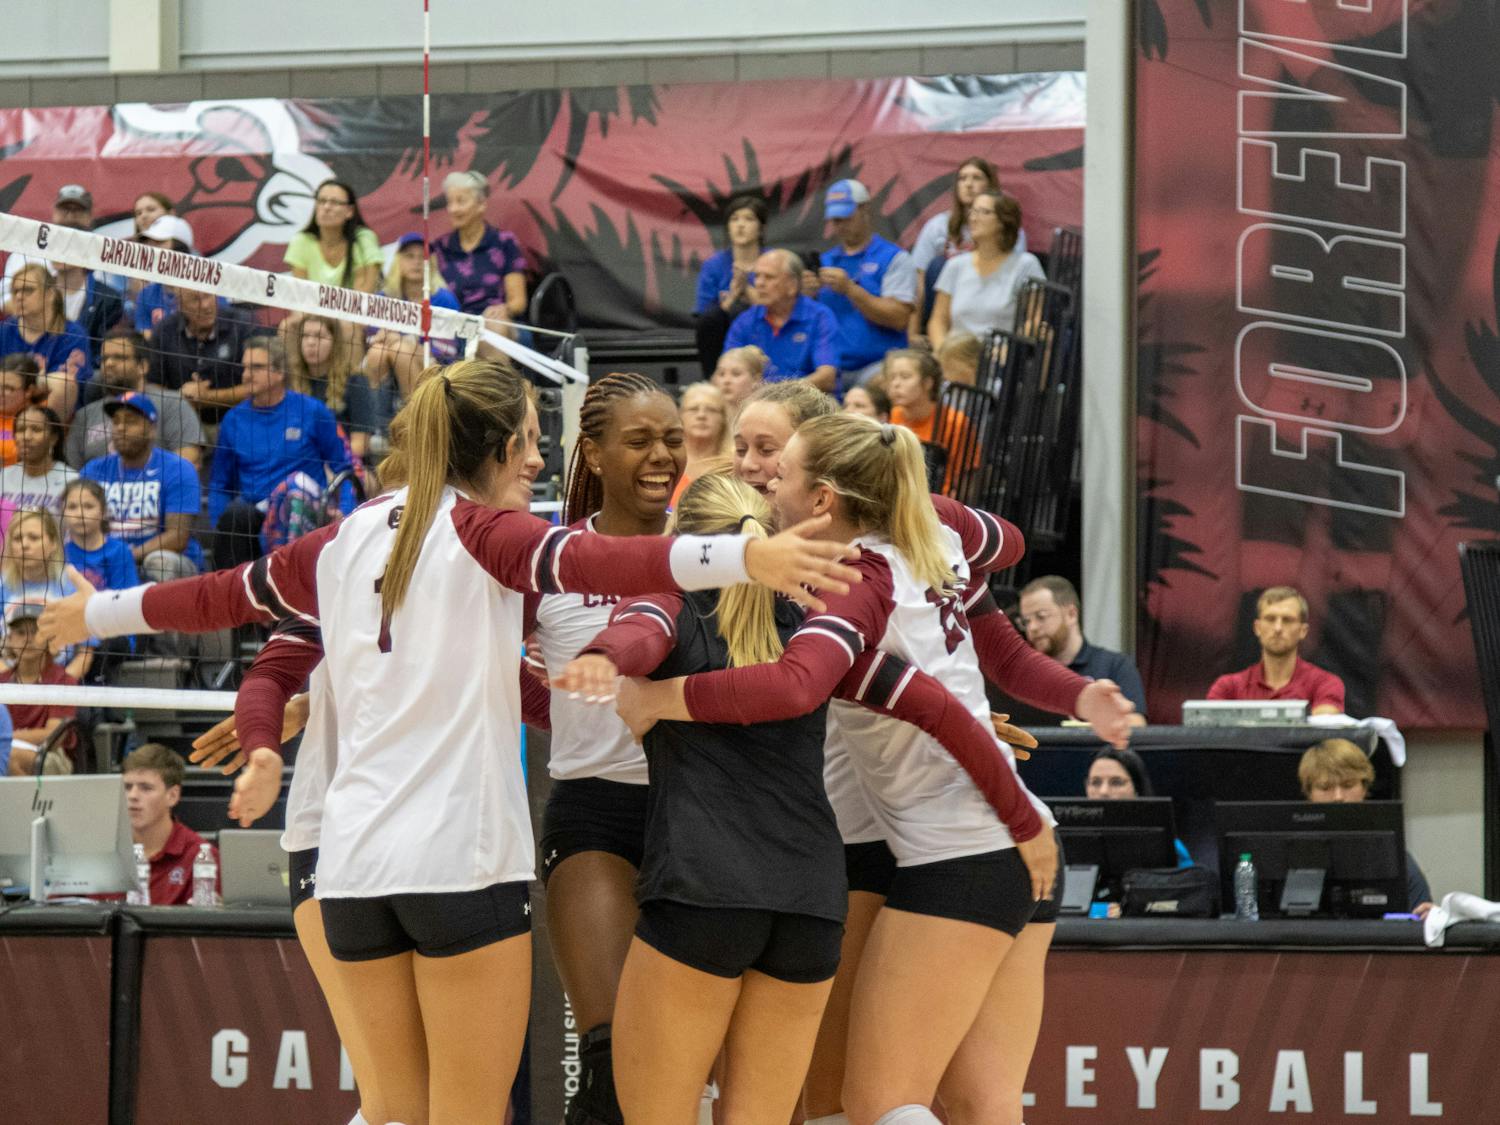 The South Carolina Gamecocks split their weekend series against the Florida Gators. After coming off of a tough loss in their first match, the Gamecocks came back on Sunday with a 3-2 win.